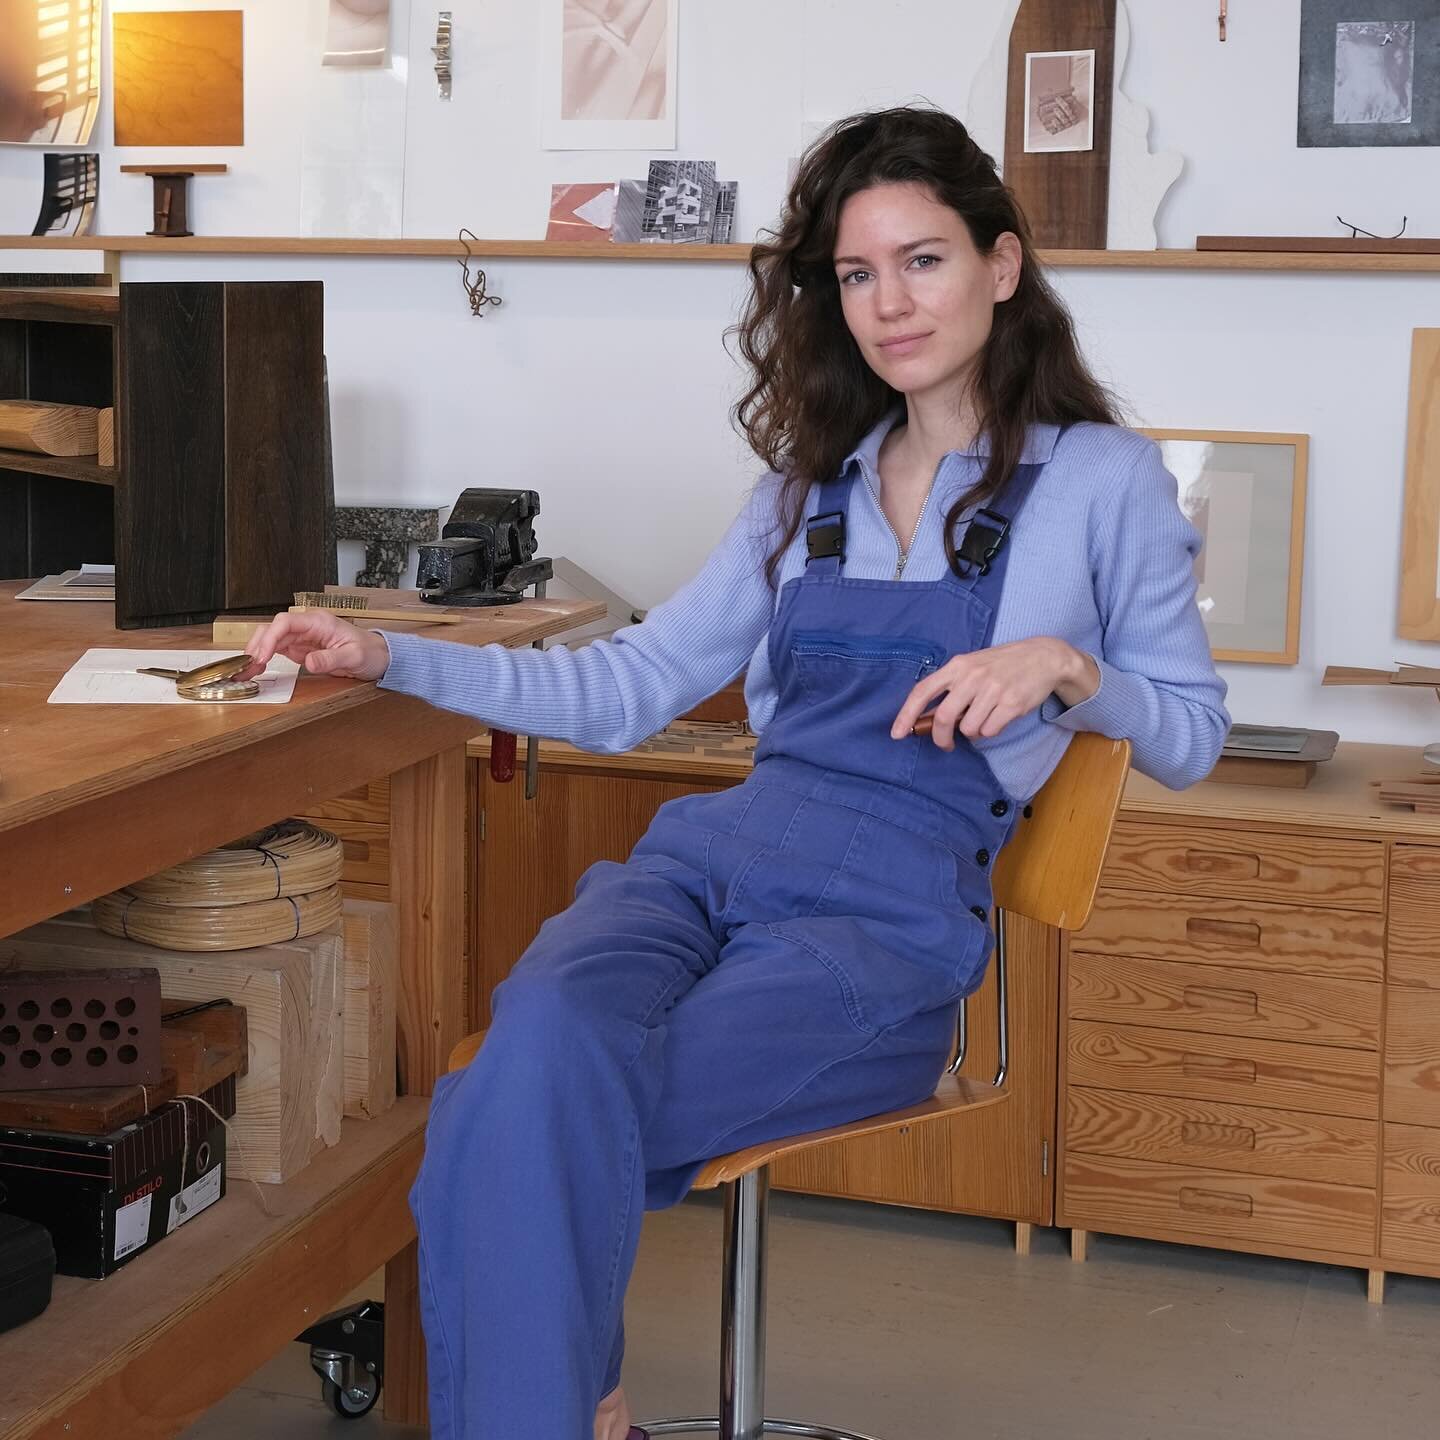 PADA welcomes Anne Kranenborg as part of Residency 44 March-April.

@annekranenborg

Anne Kranenborg’s multidisciplinary playground explores the intertwined art and design field. 

“While being trained as a furniture designer, I beca